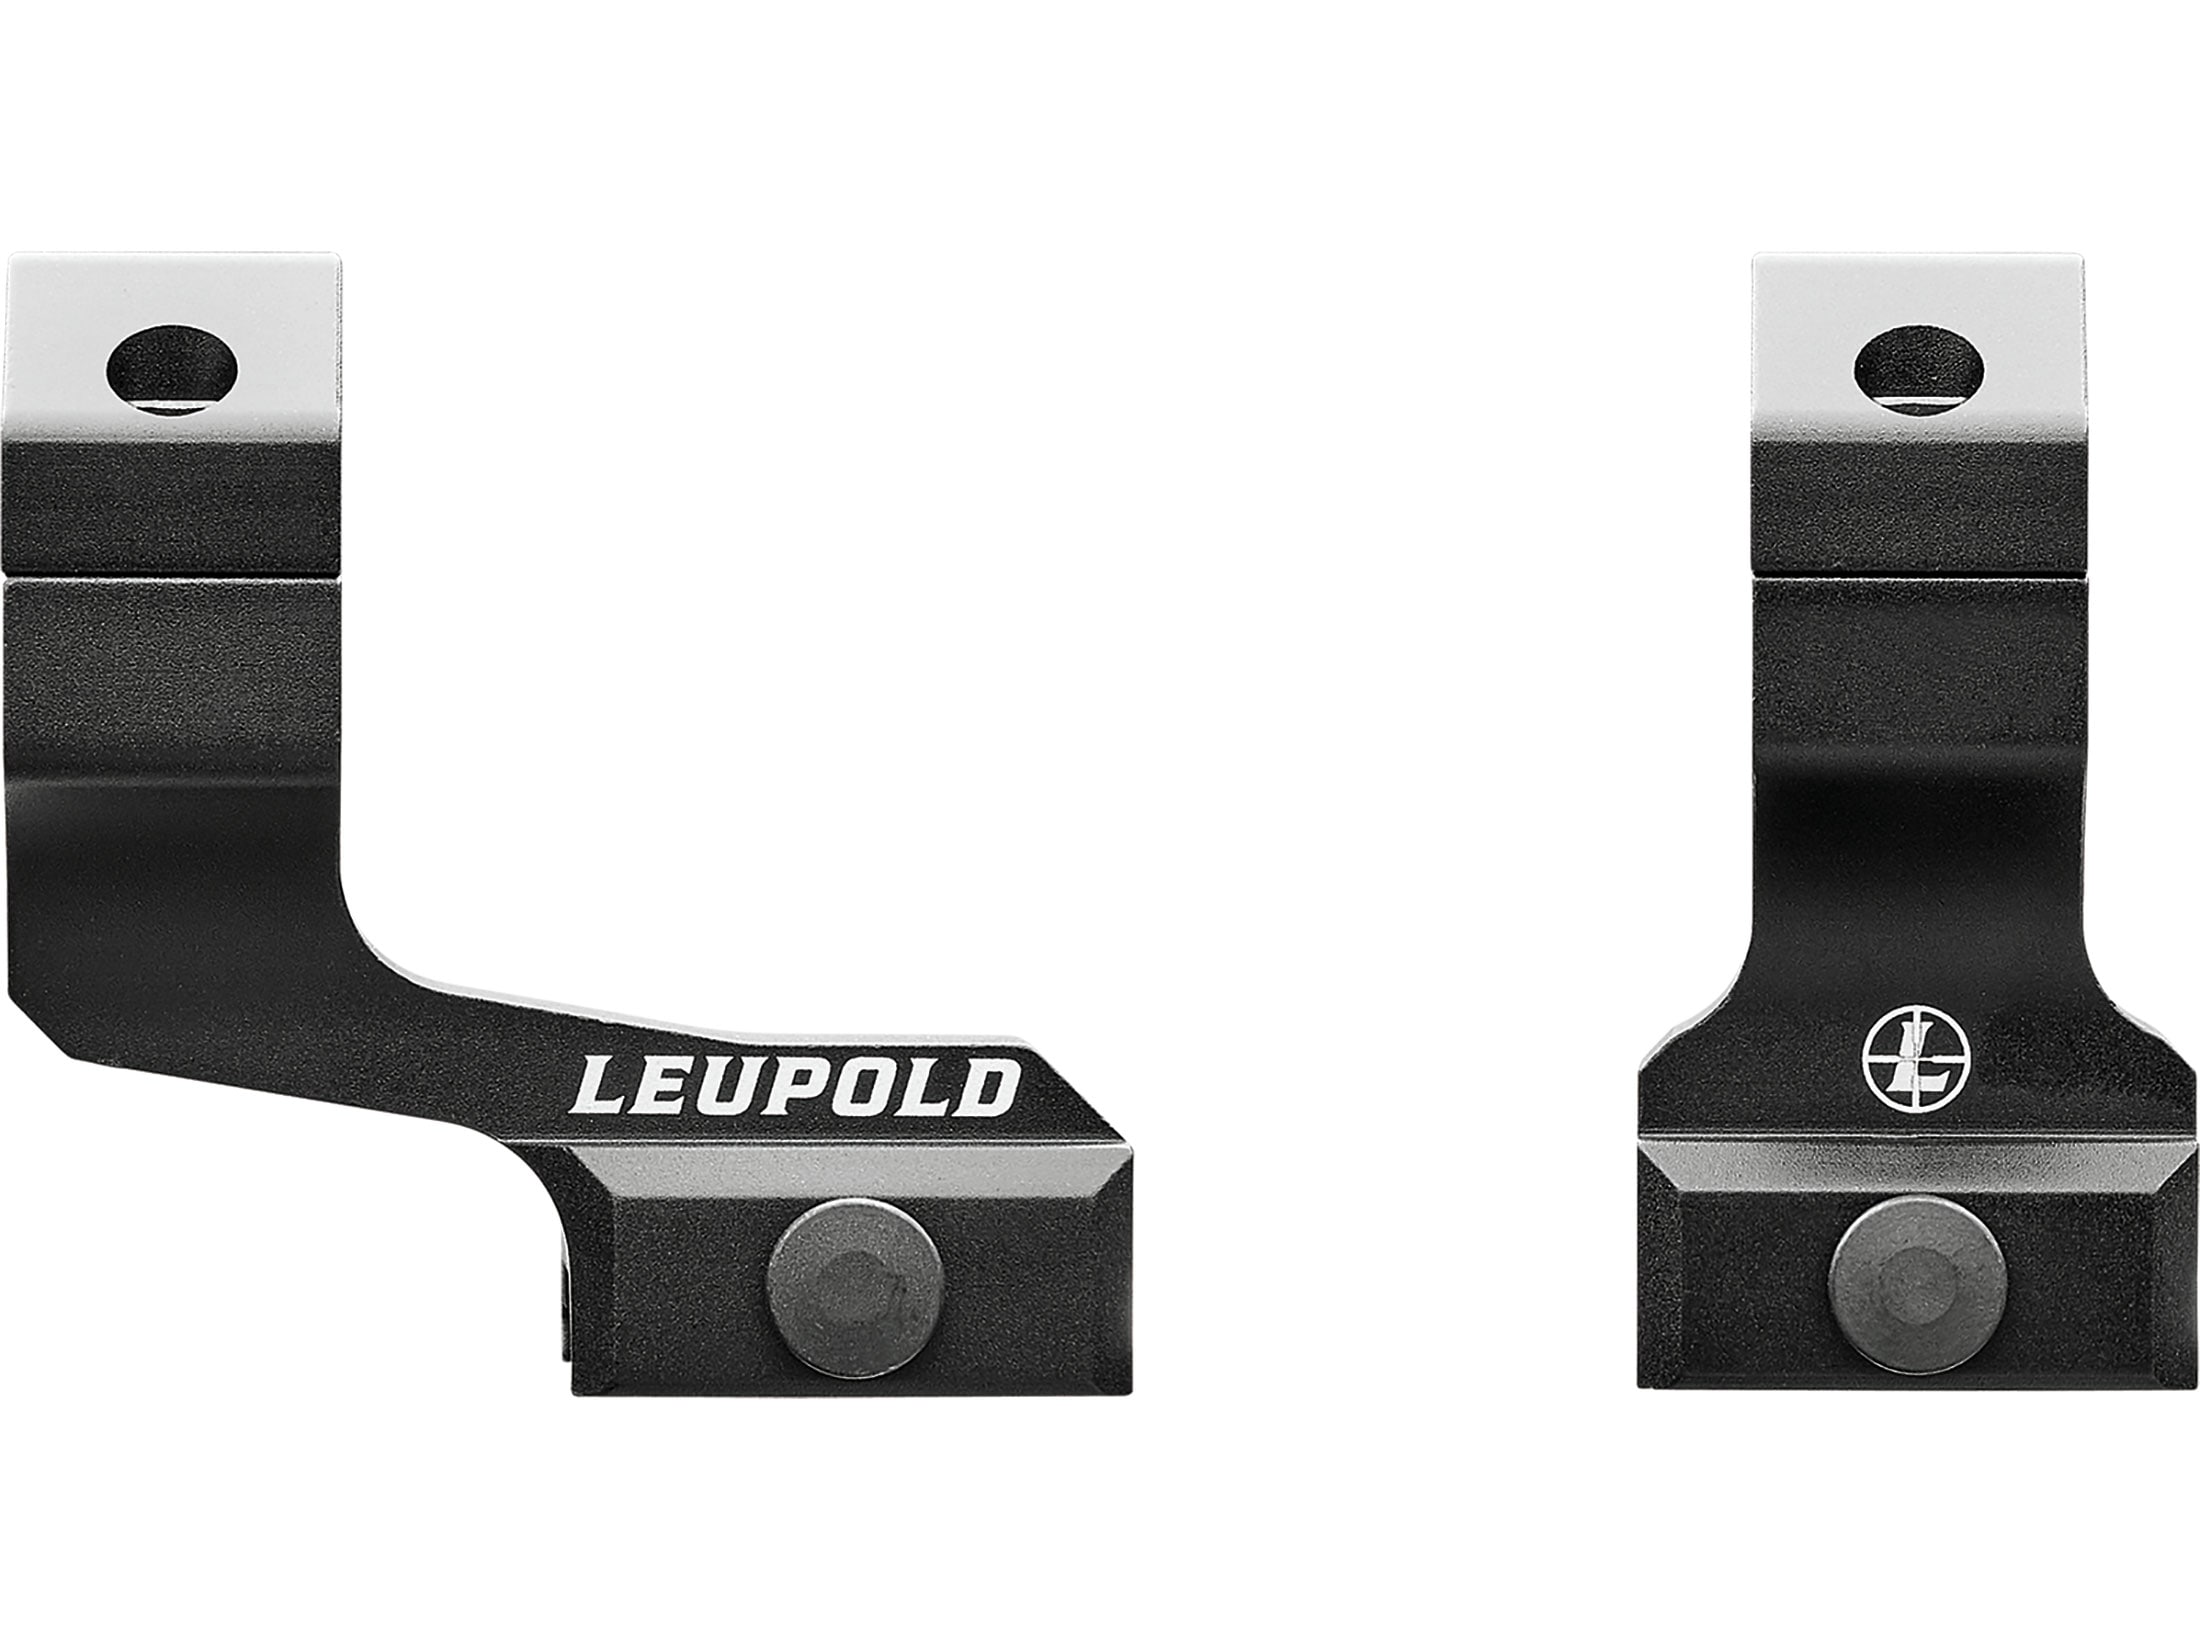 Leupold Mark 2 Integral Mounting System (IMS) 2-Piece Picatinny-Style